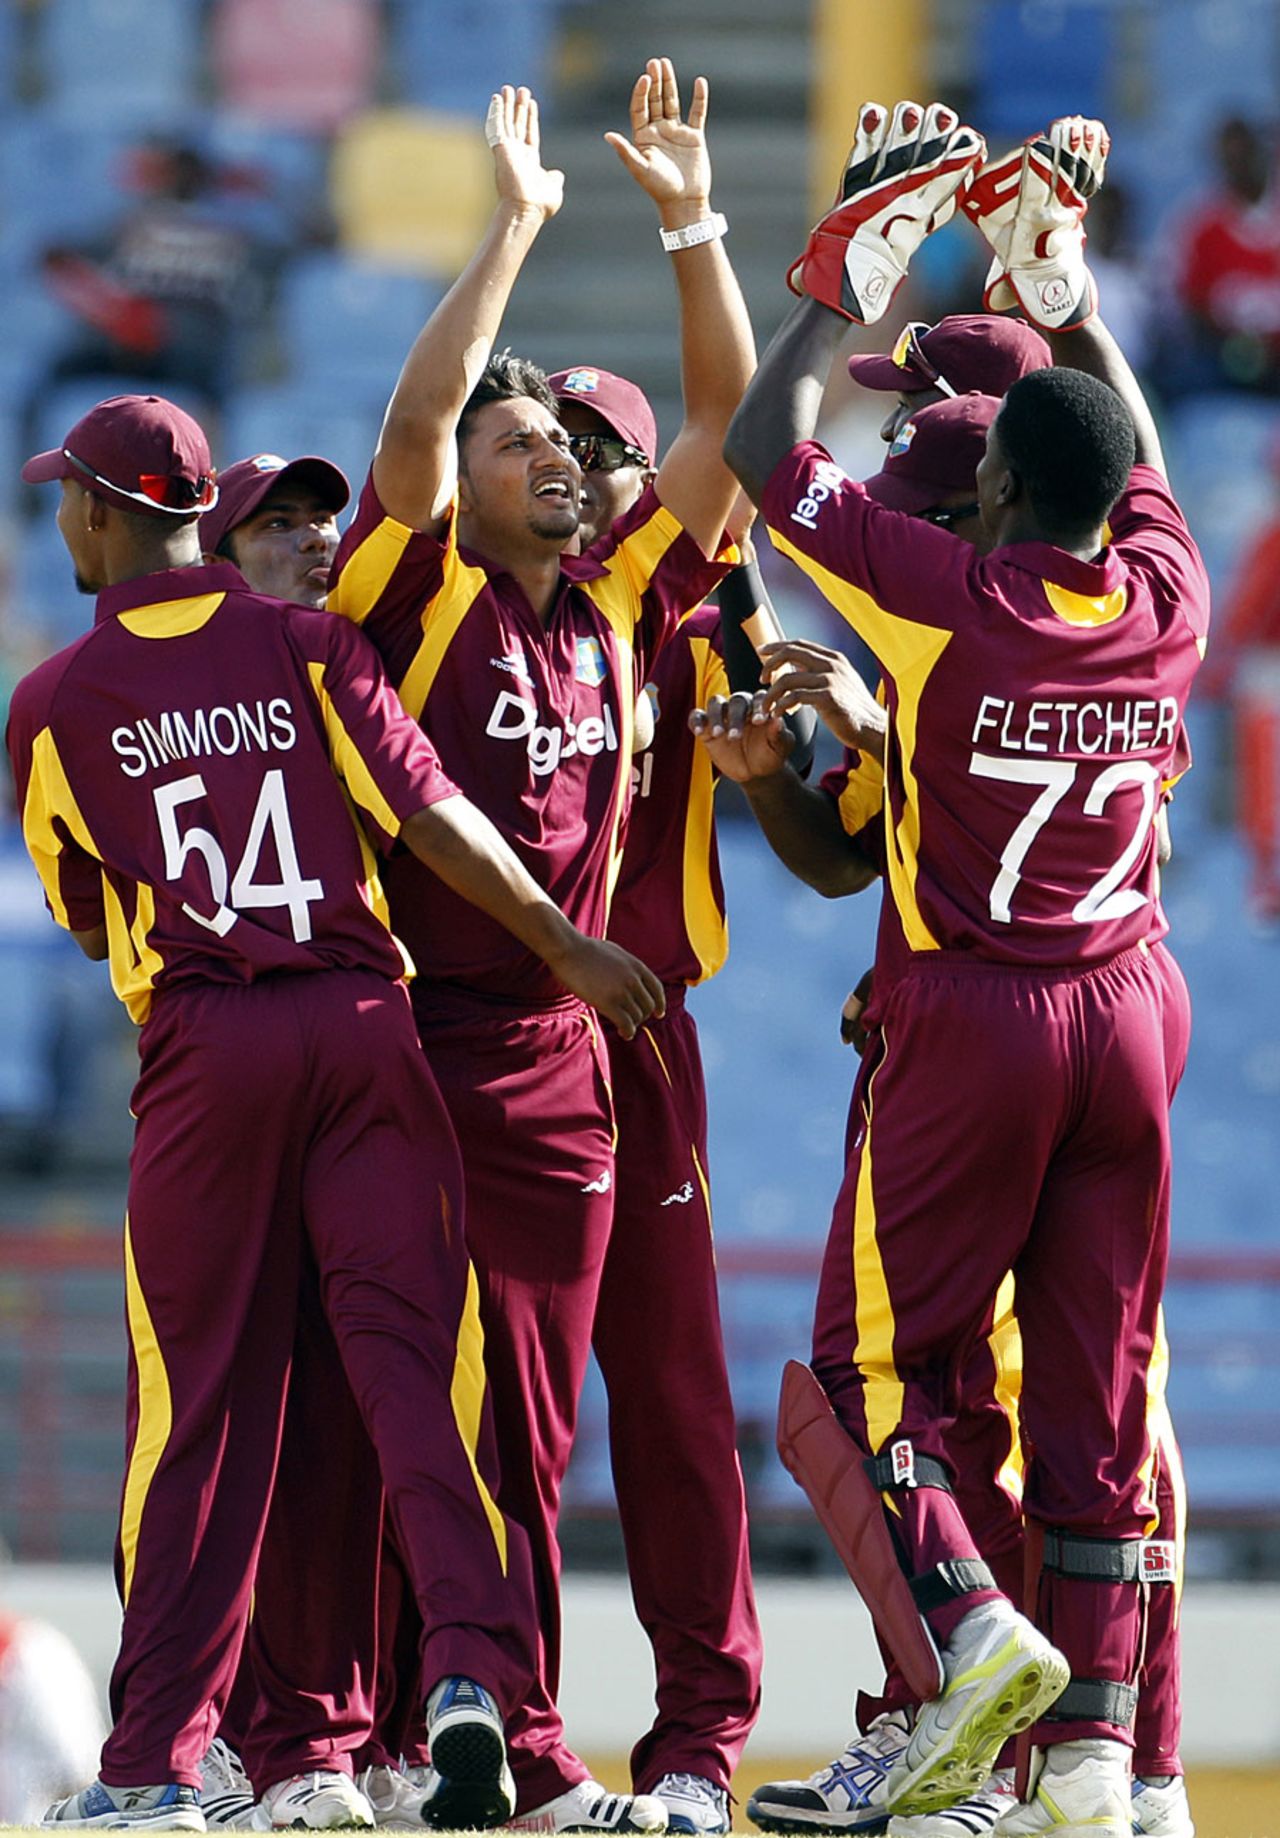 West Indies' bowlers kept picking up wickets at regular intervals, West Indies v Pakistan, Only Twenty20, St Lucia, April 21, 2010
